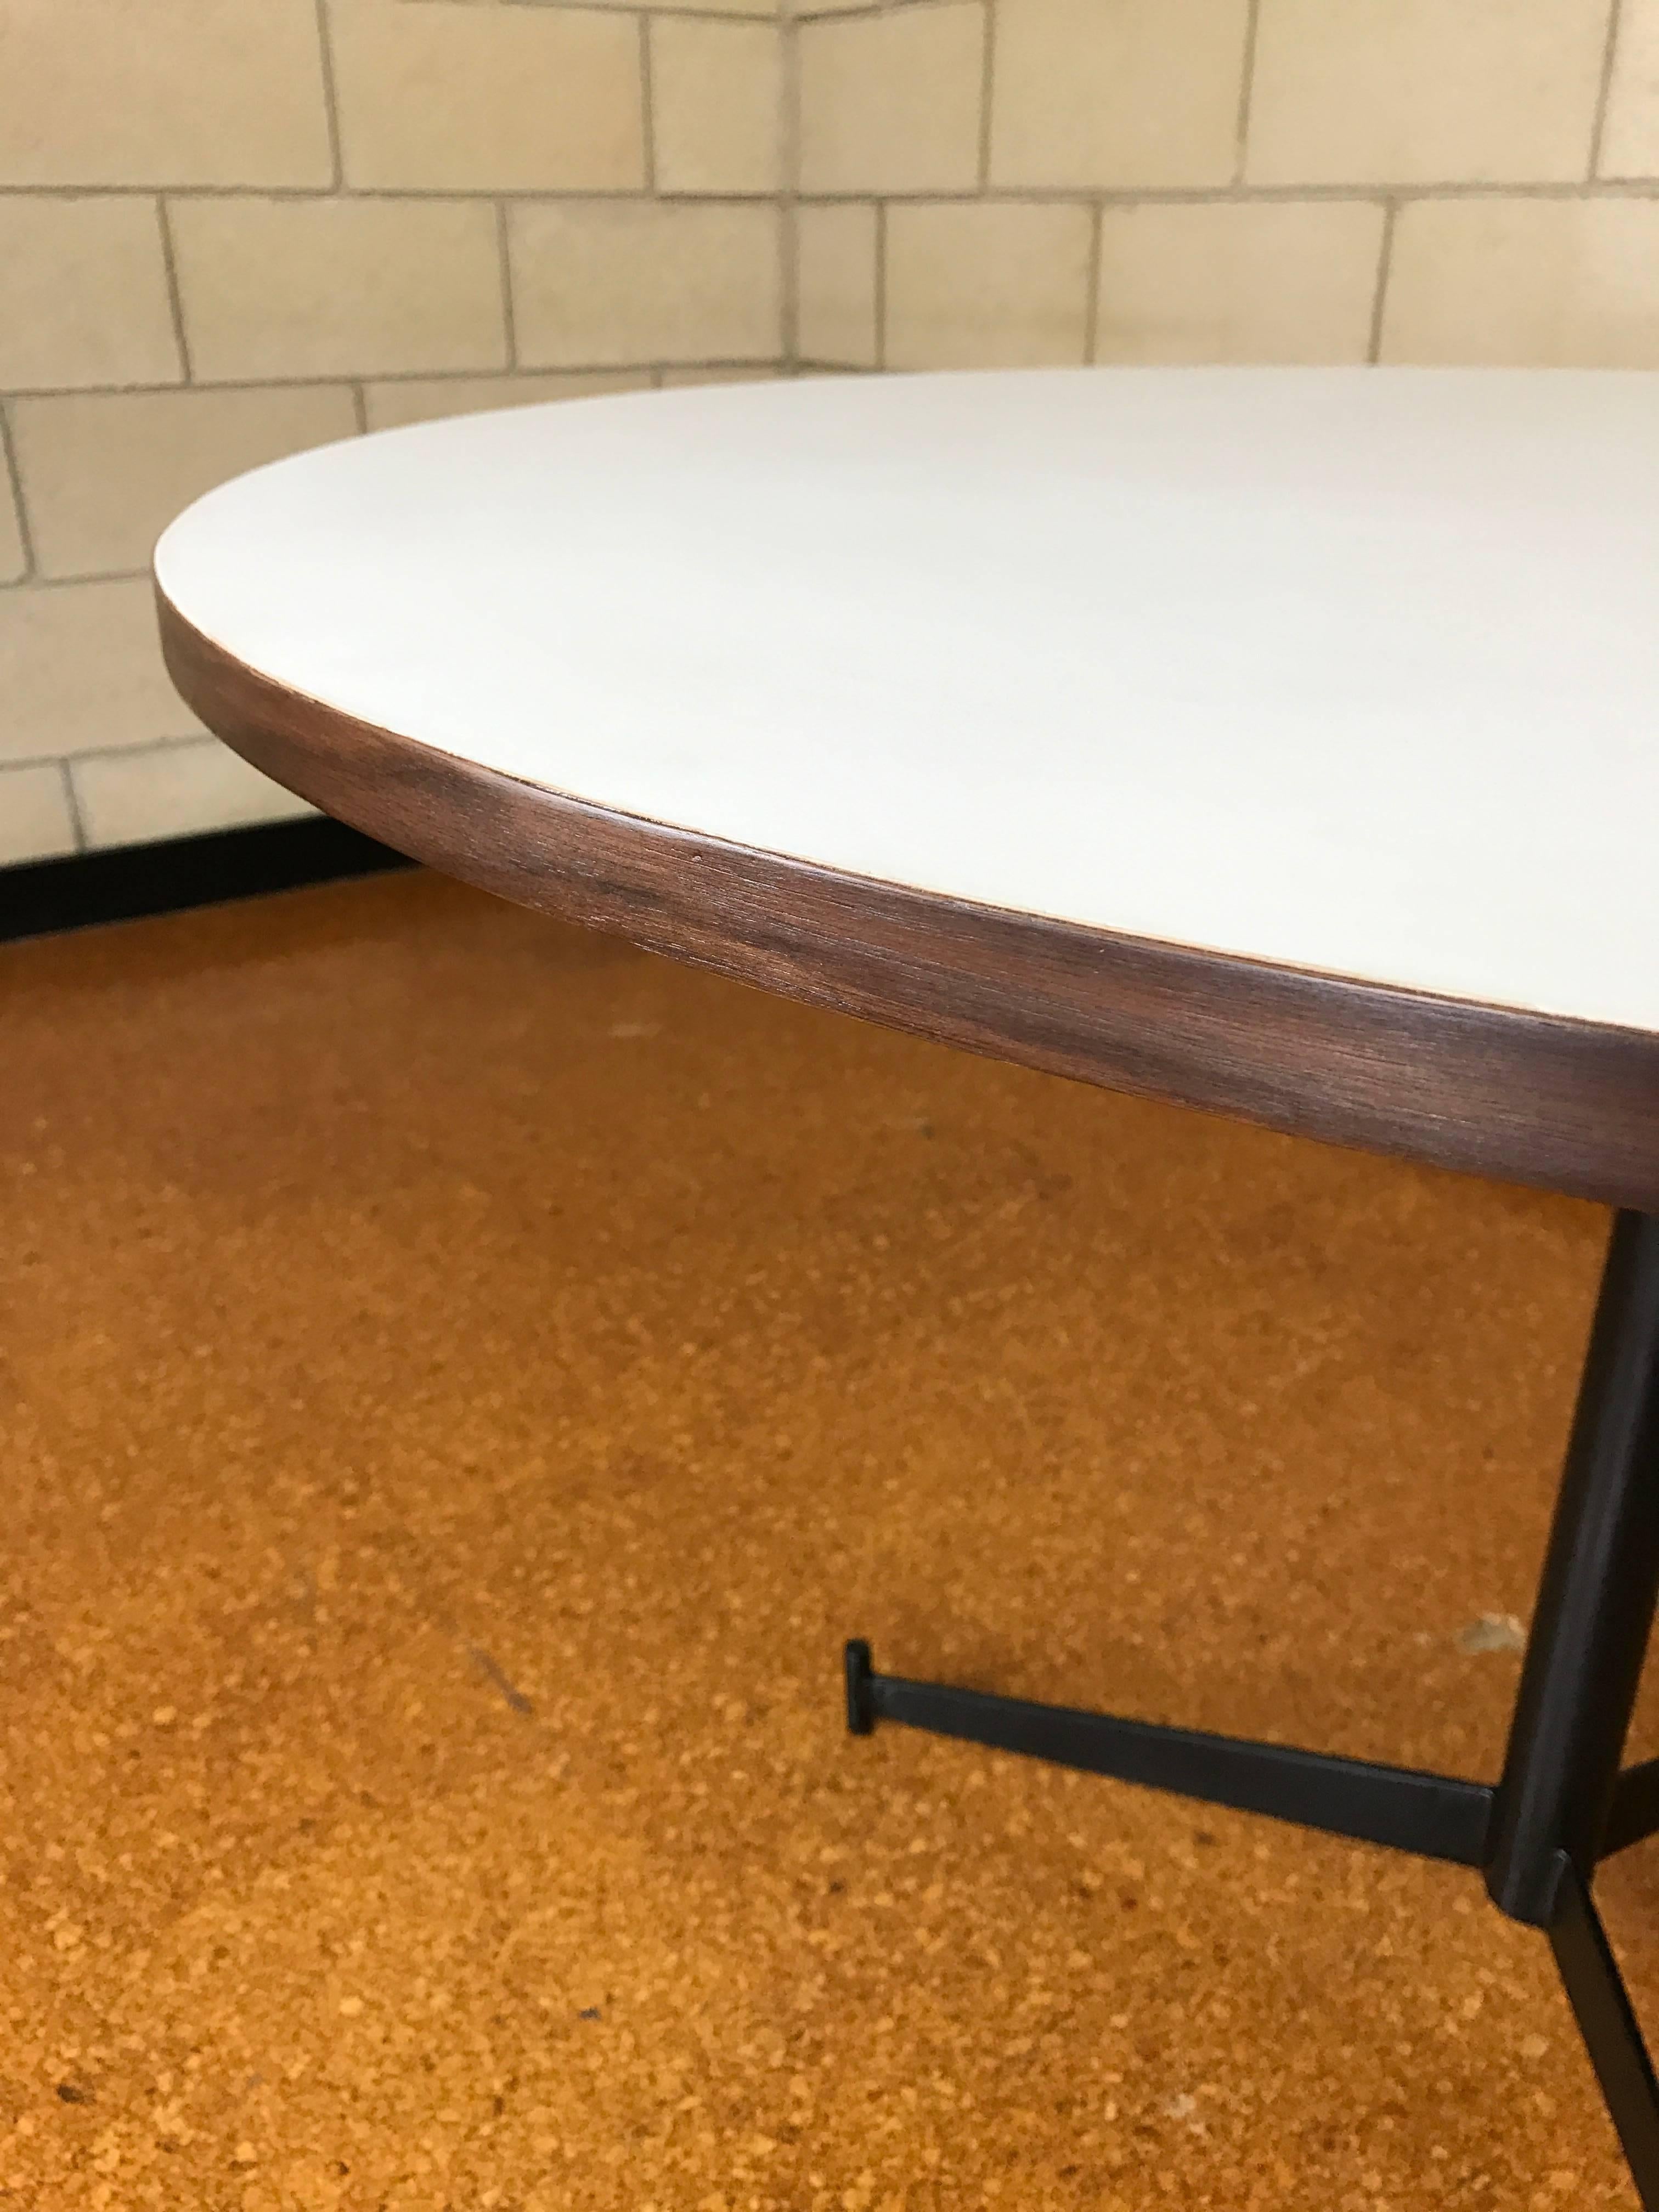 Restored Paul McCobb style round dinette dining table made of an iron three star iron base and white Formica top with walnut trim. The white Formica top, walnut trim, and iron bade have been restored. The top detaches from the base with a